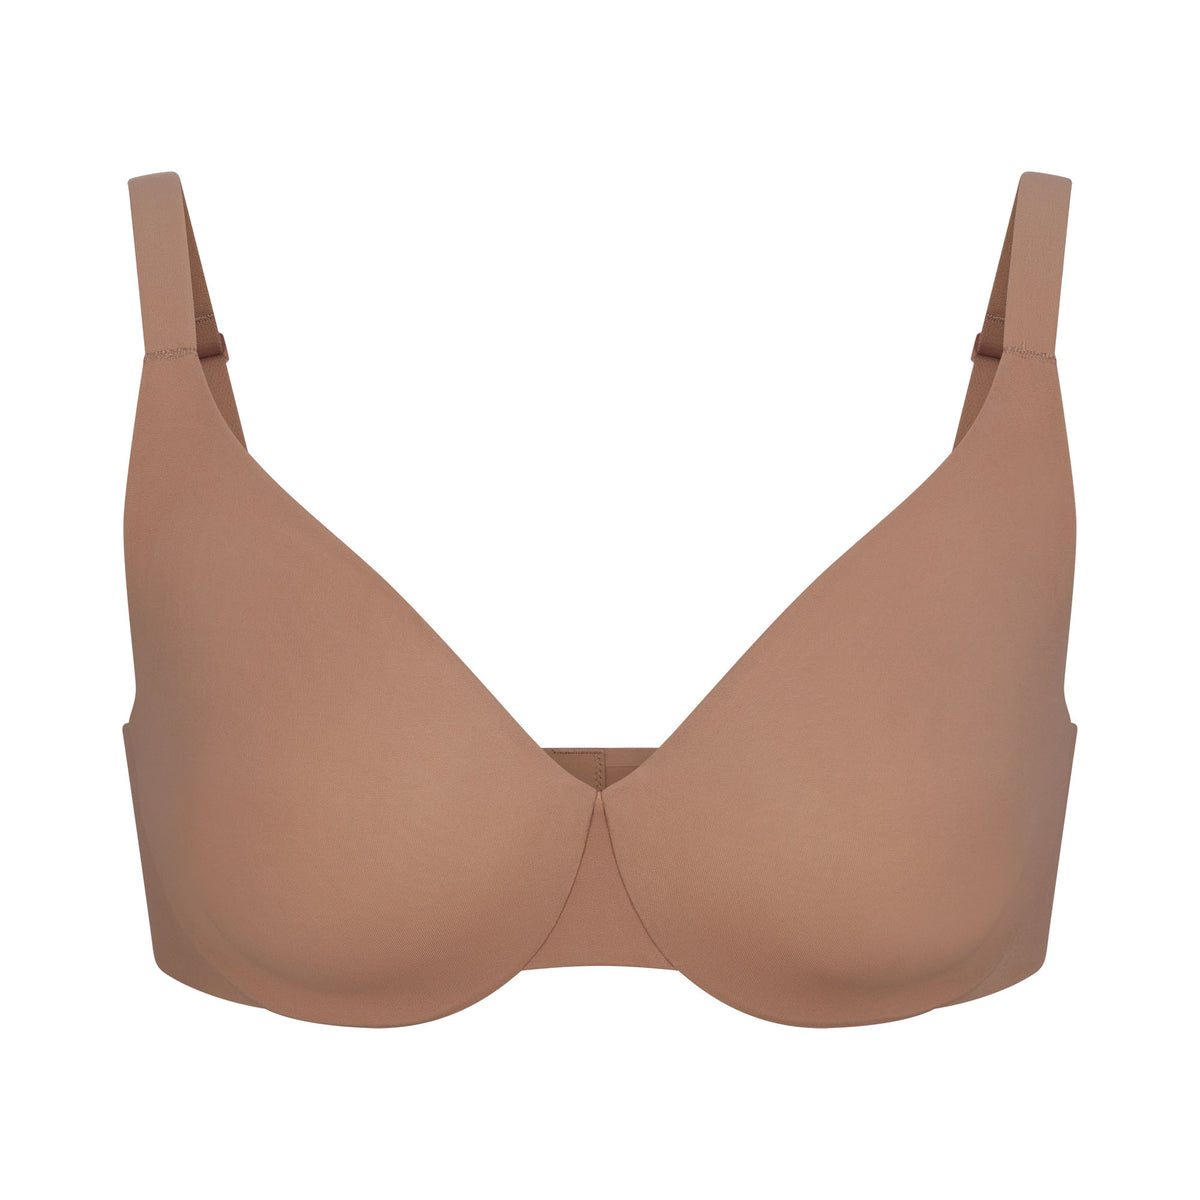 SKIMS drops Smoothing Intimates collection featuring bras and underwear -  Good Morning America